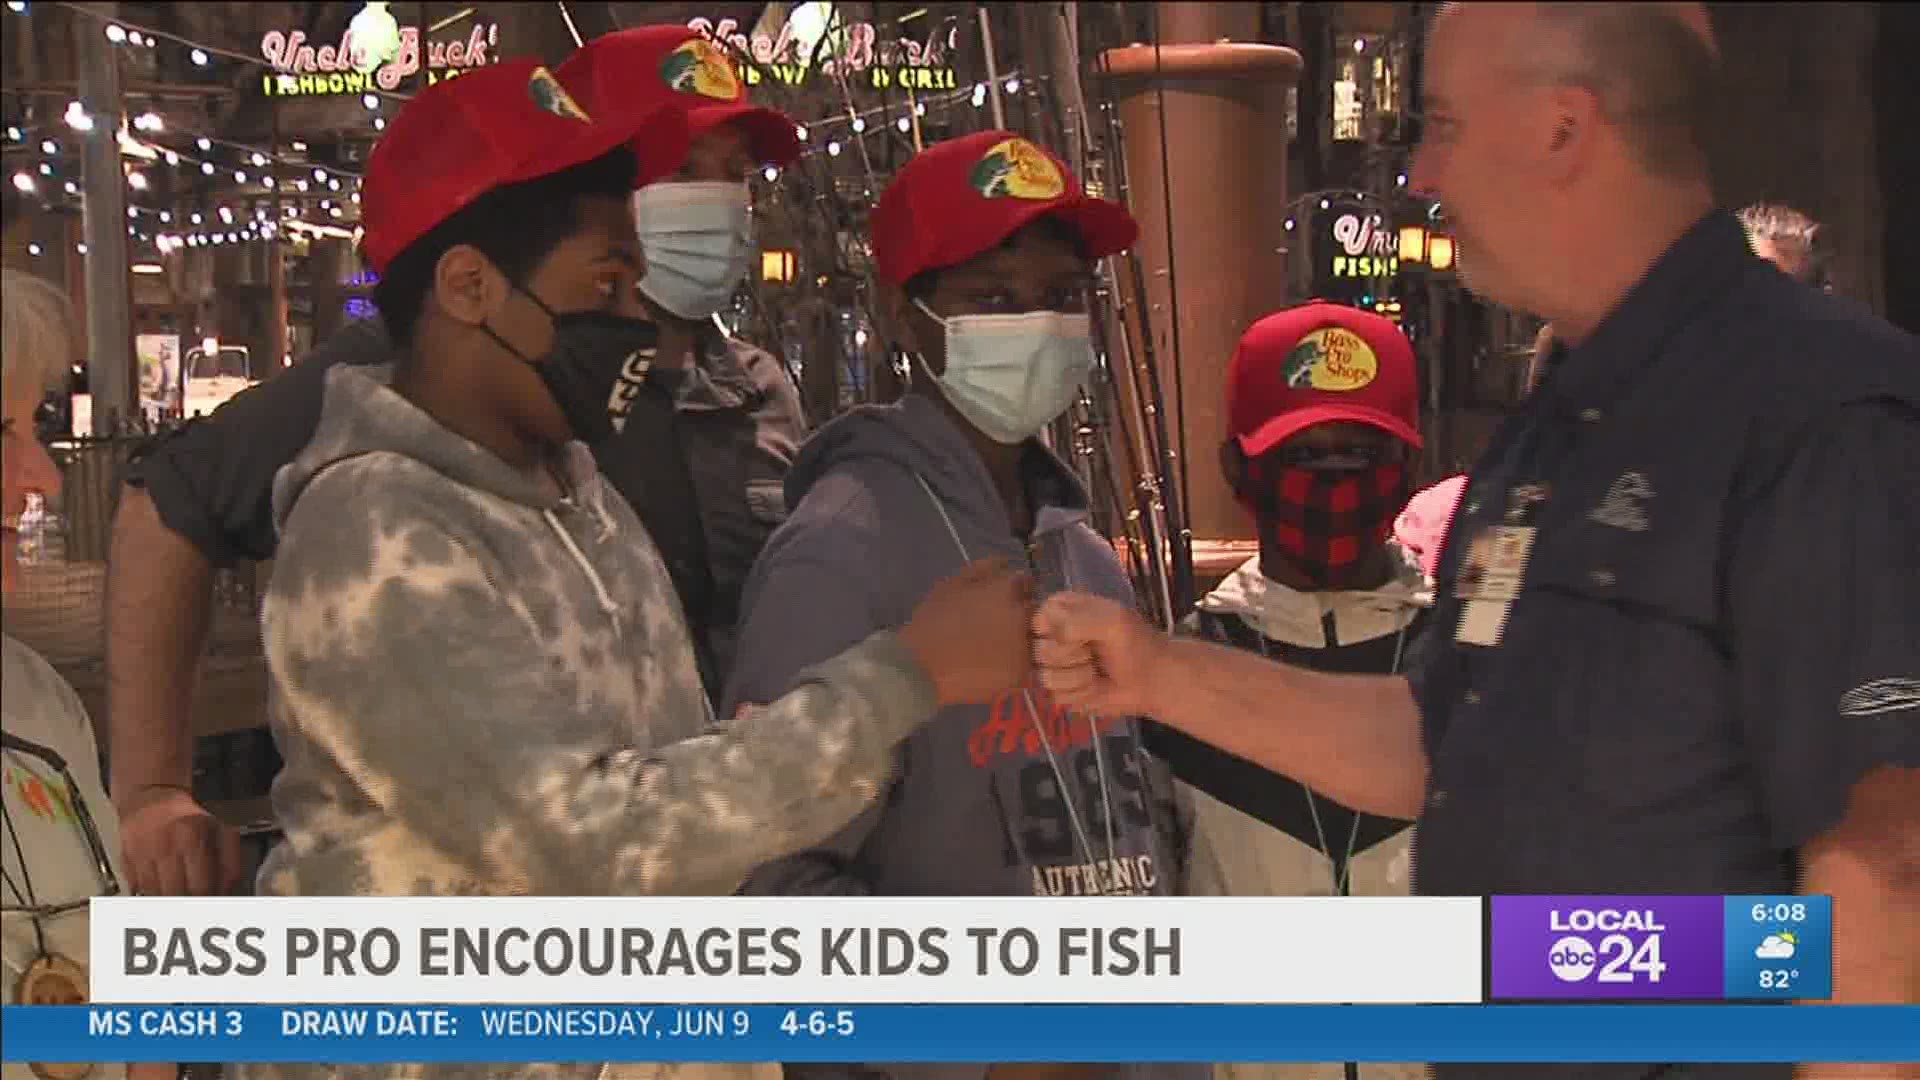 Over the next two weekends, kids are invited to Bass Pro Locations to catch their first fish, get free crafts, and take home a "first fish" certificate.